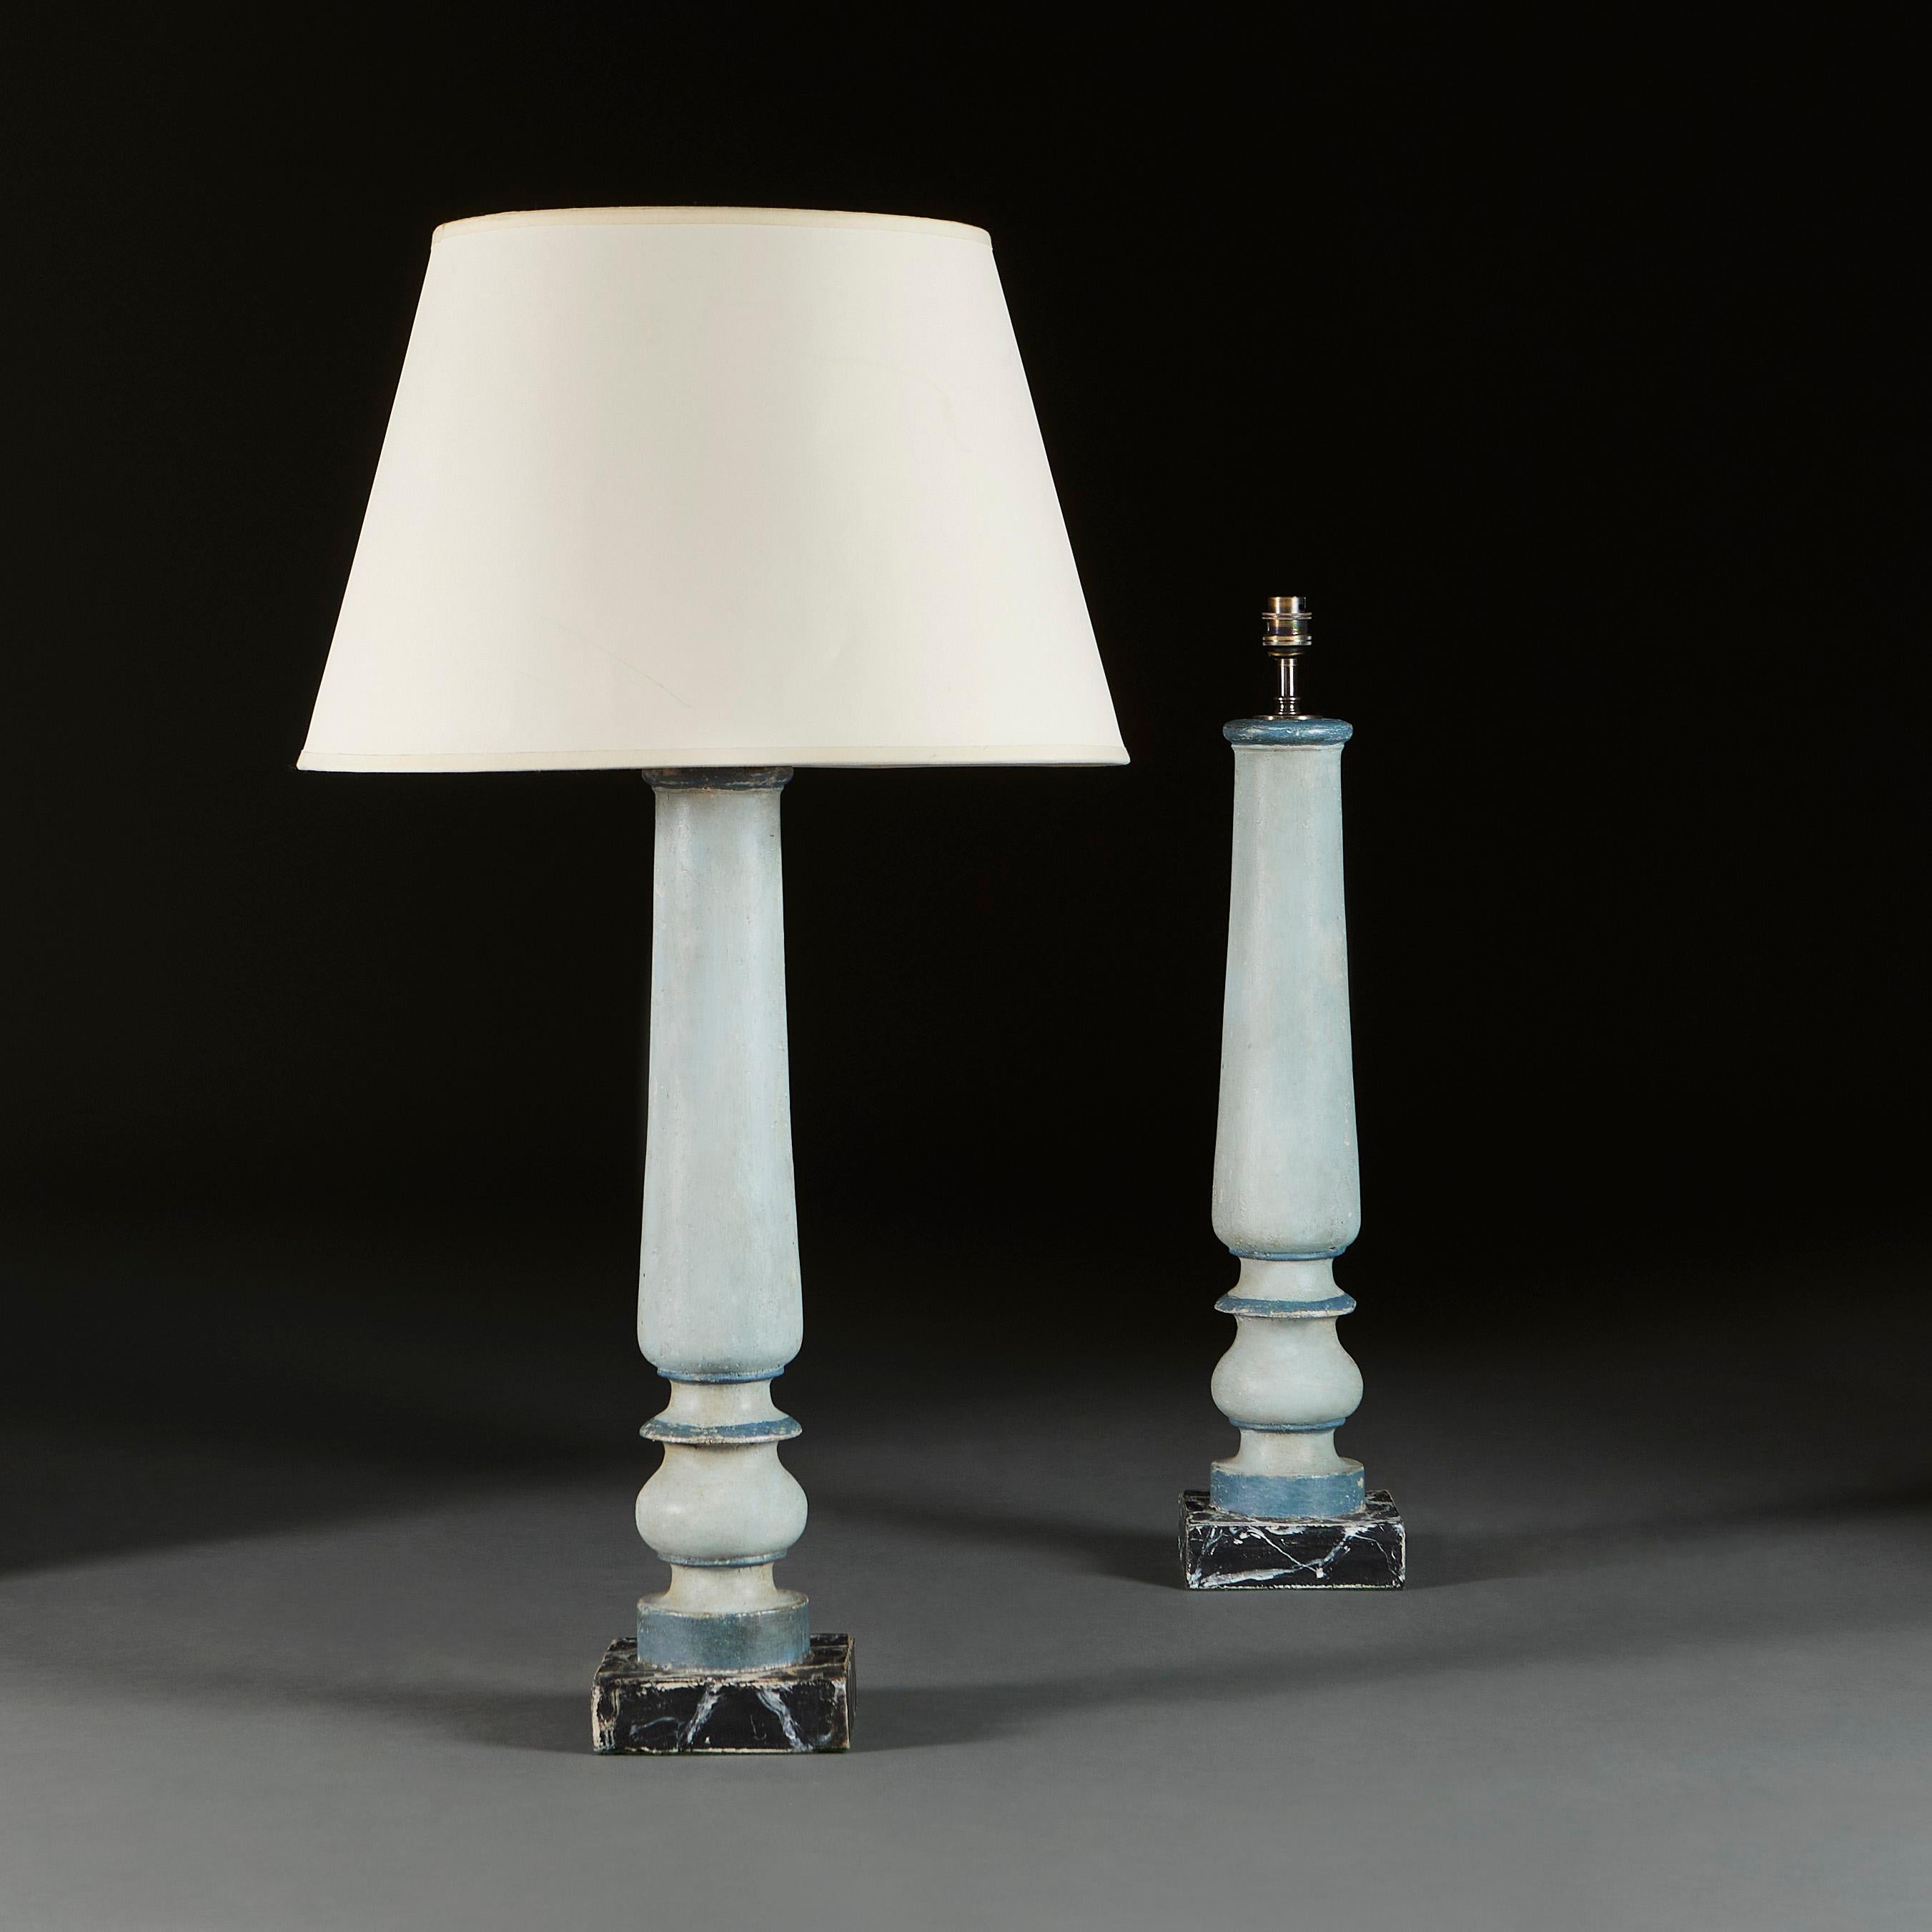 Italy, circa 1900.

A pair of unusual painted Italian table lamps with square pedestal bases, painted to simulate marble.

Please note: This is currently wired for the UK with BC bulb fitting, twisted bronze silk flex, torpedo switch, and 13amp